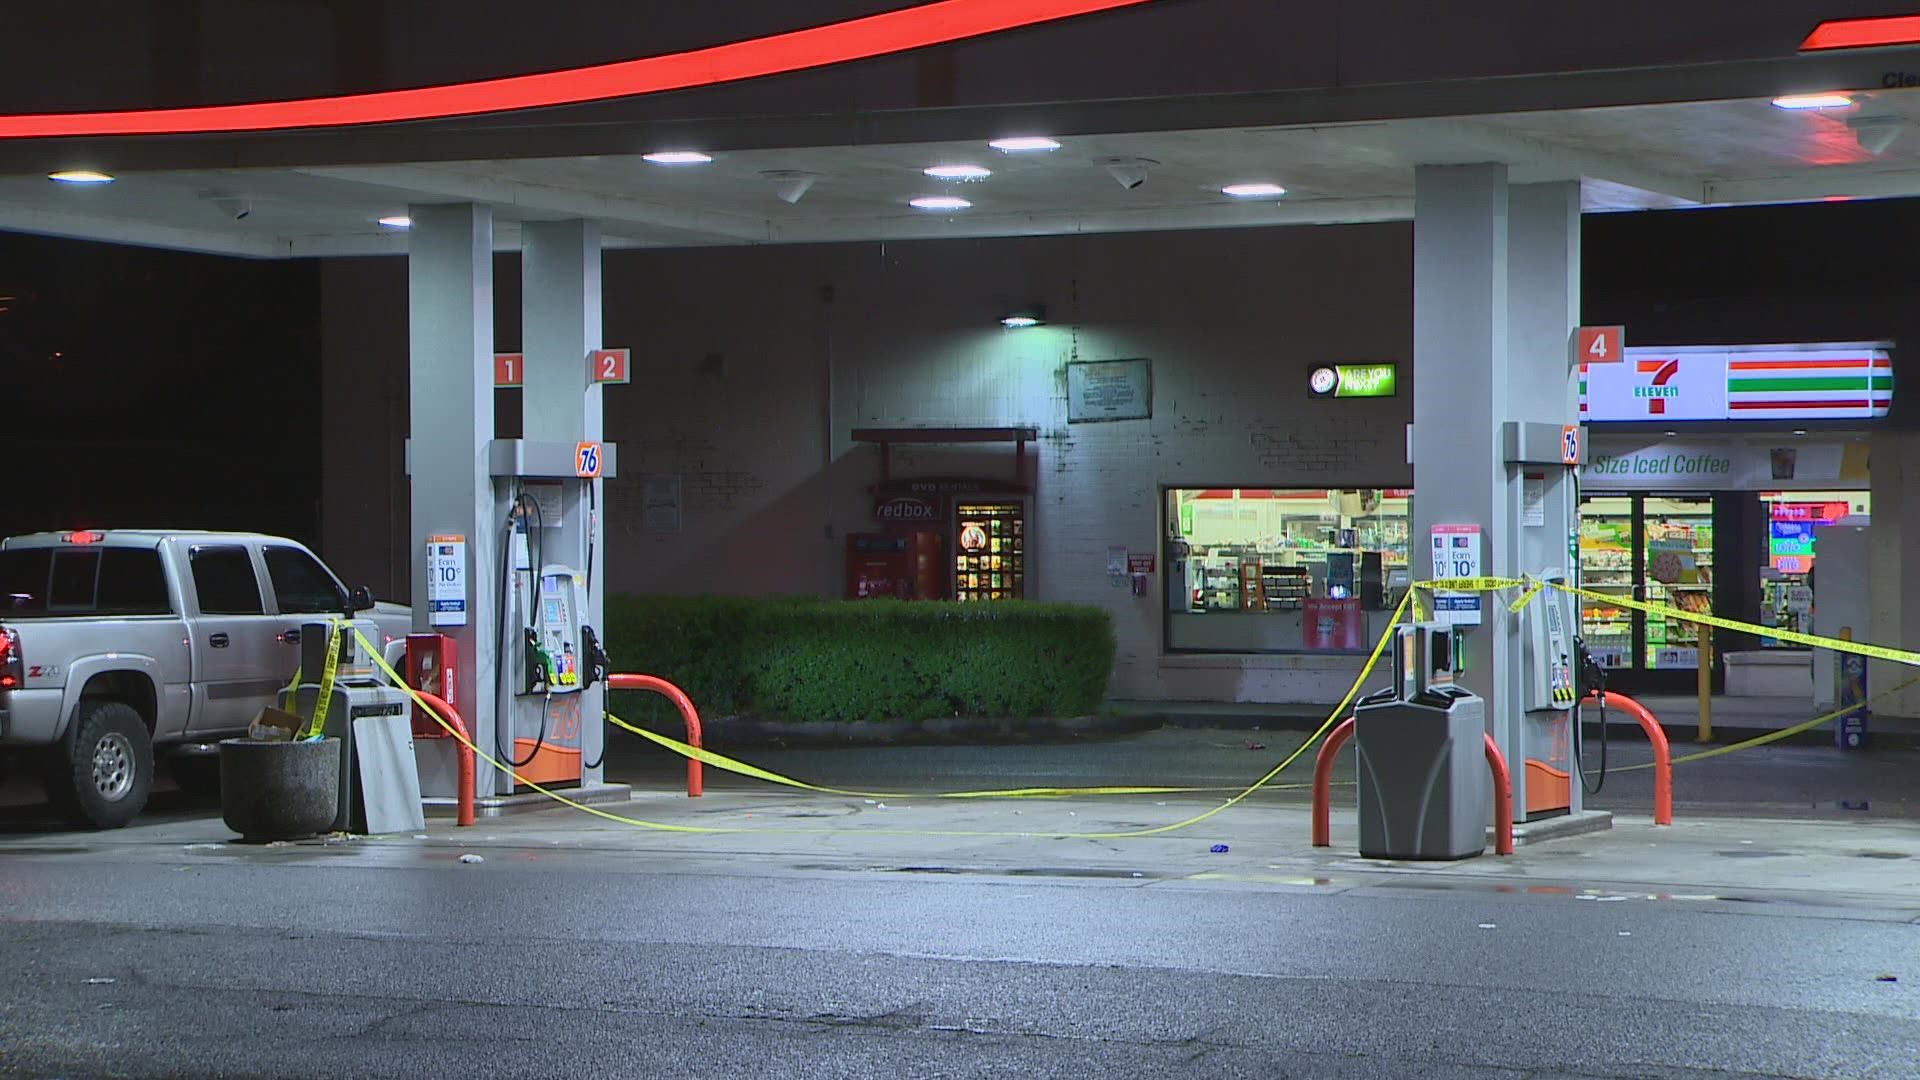 The Pierce County Sheriff’s Department is investigating after an “innocent bystander” was shot and killed at a gas station in Spanaway Thursday night.